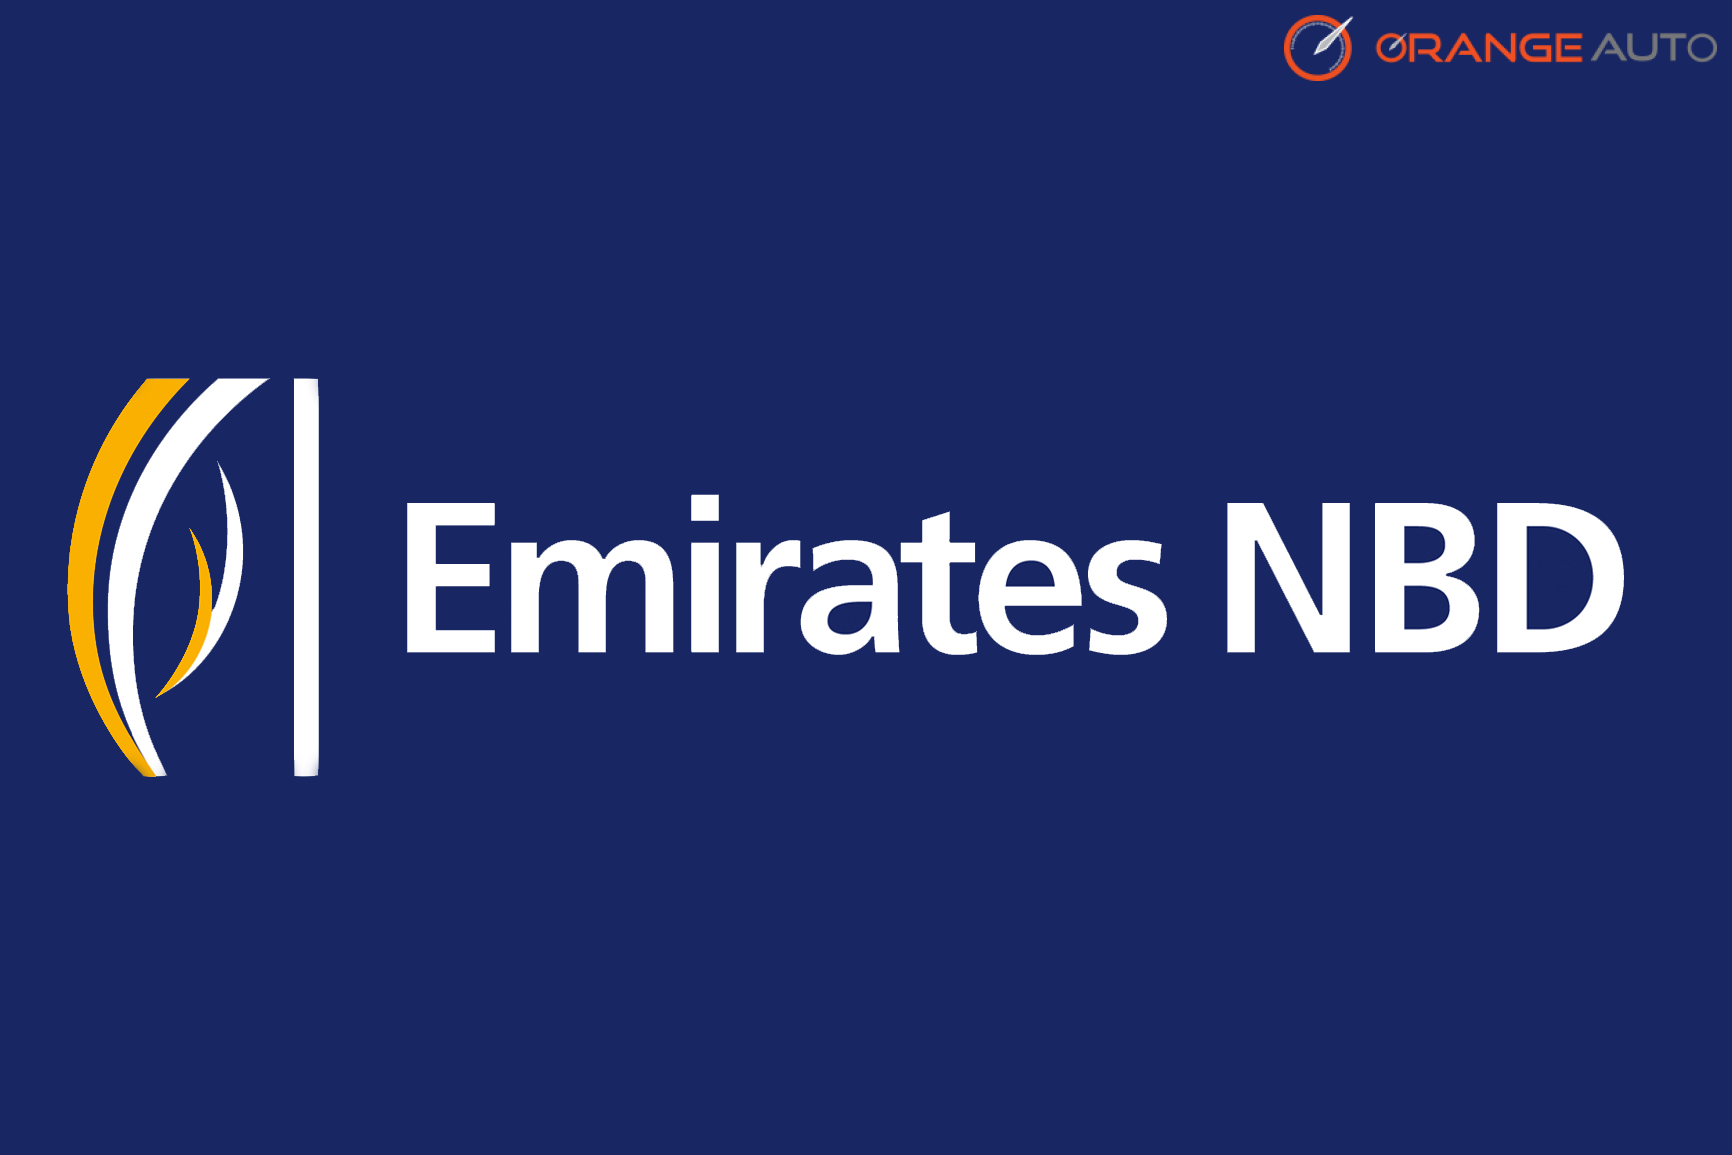 Orange Auto Signs Deal with Emirates NBD Bank to Offer Discounts for Customers